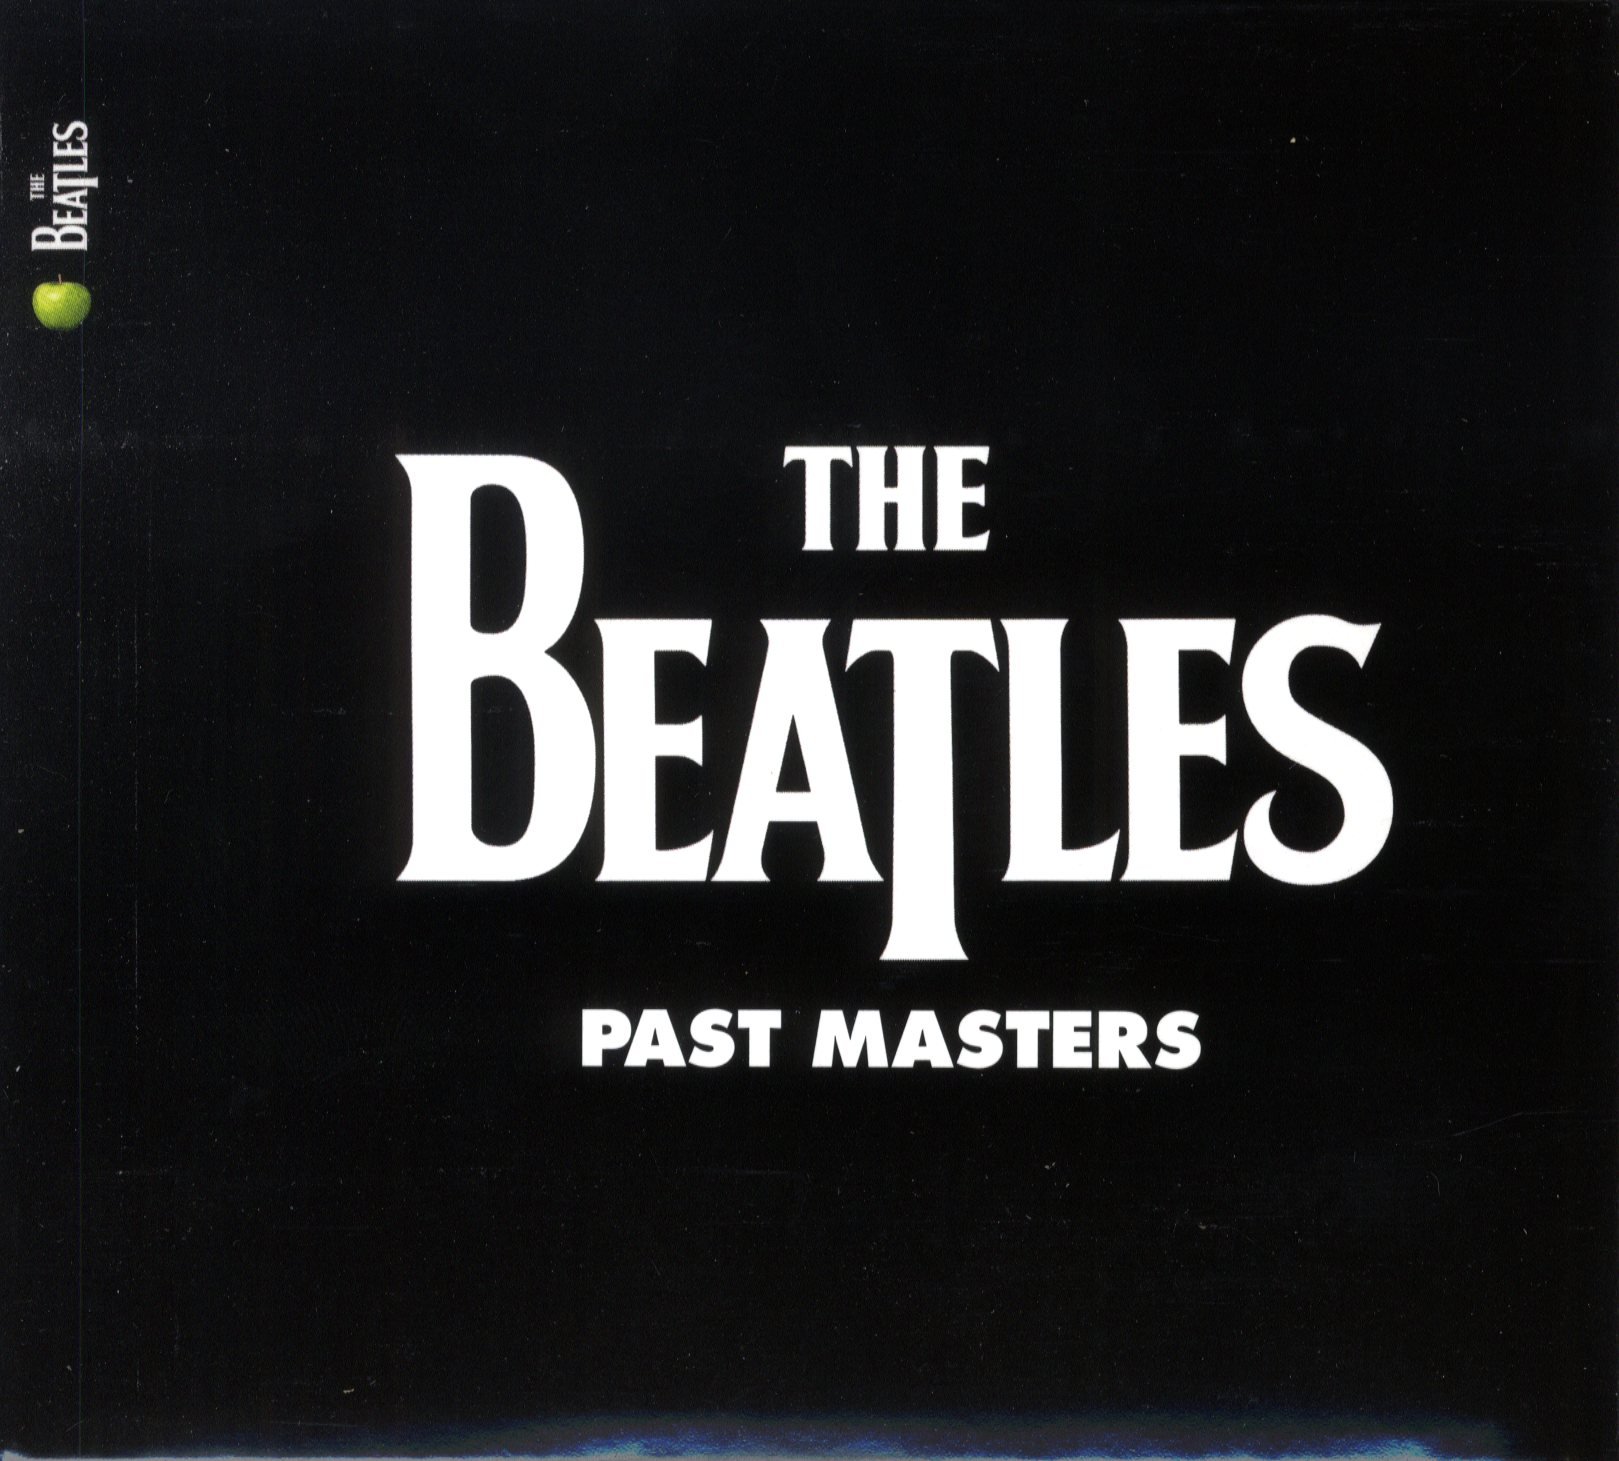 The Beatles-Past Masters-(5099969943515)-REISSUE REMASTERED-2LP-FLAC-2018-WRE